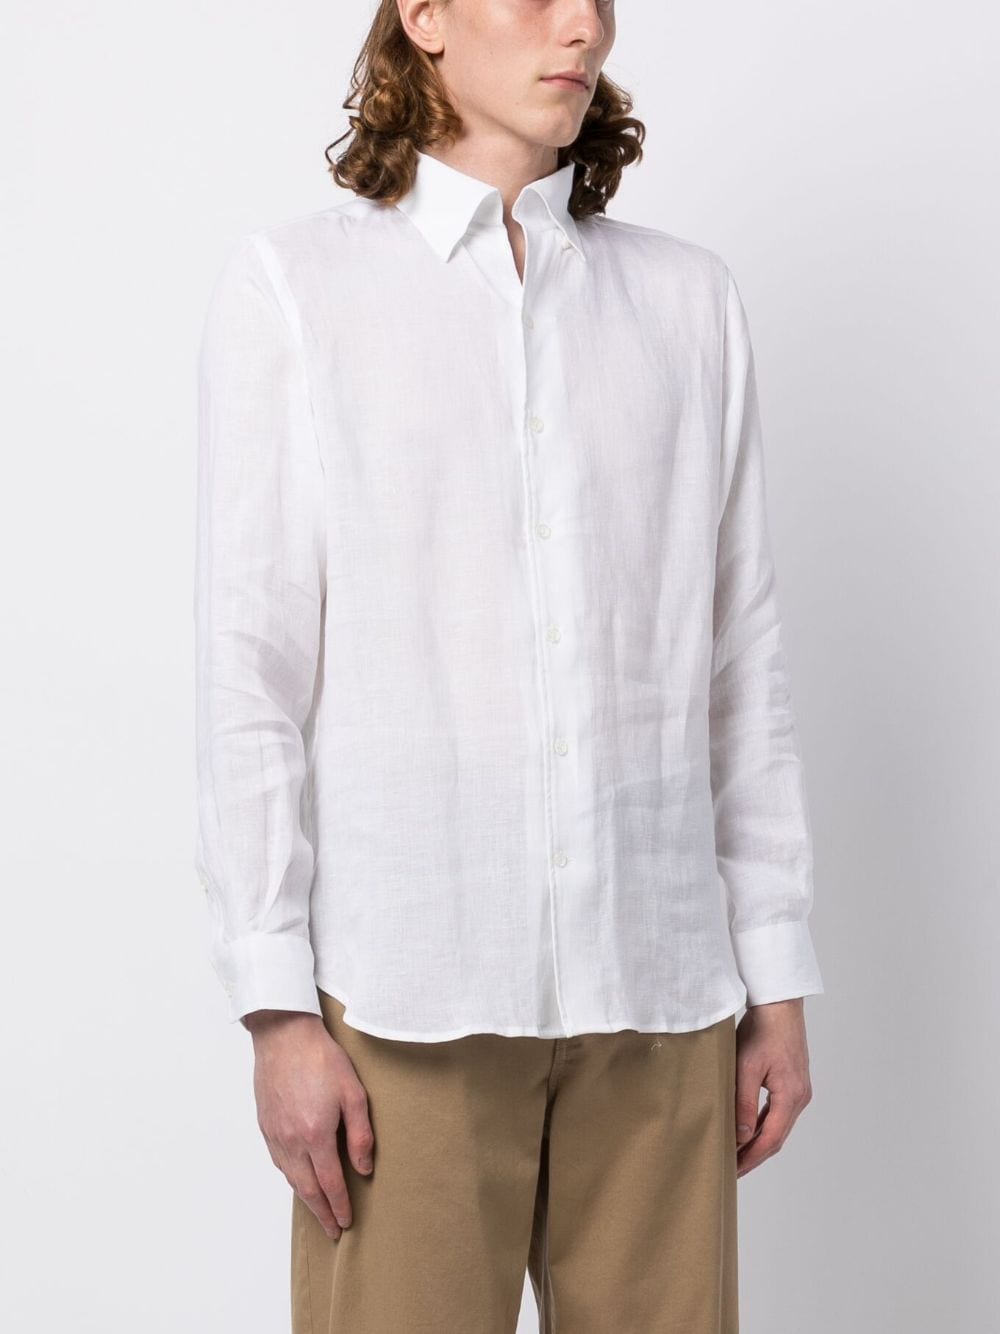 Shop Man On The Boon. Long-sleeved Linen Shirt In White